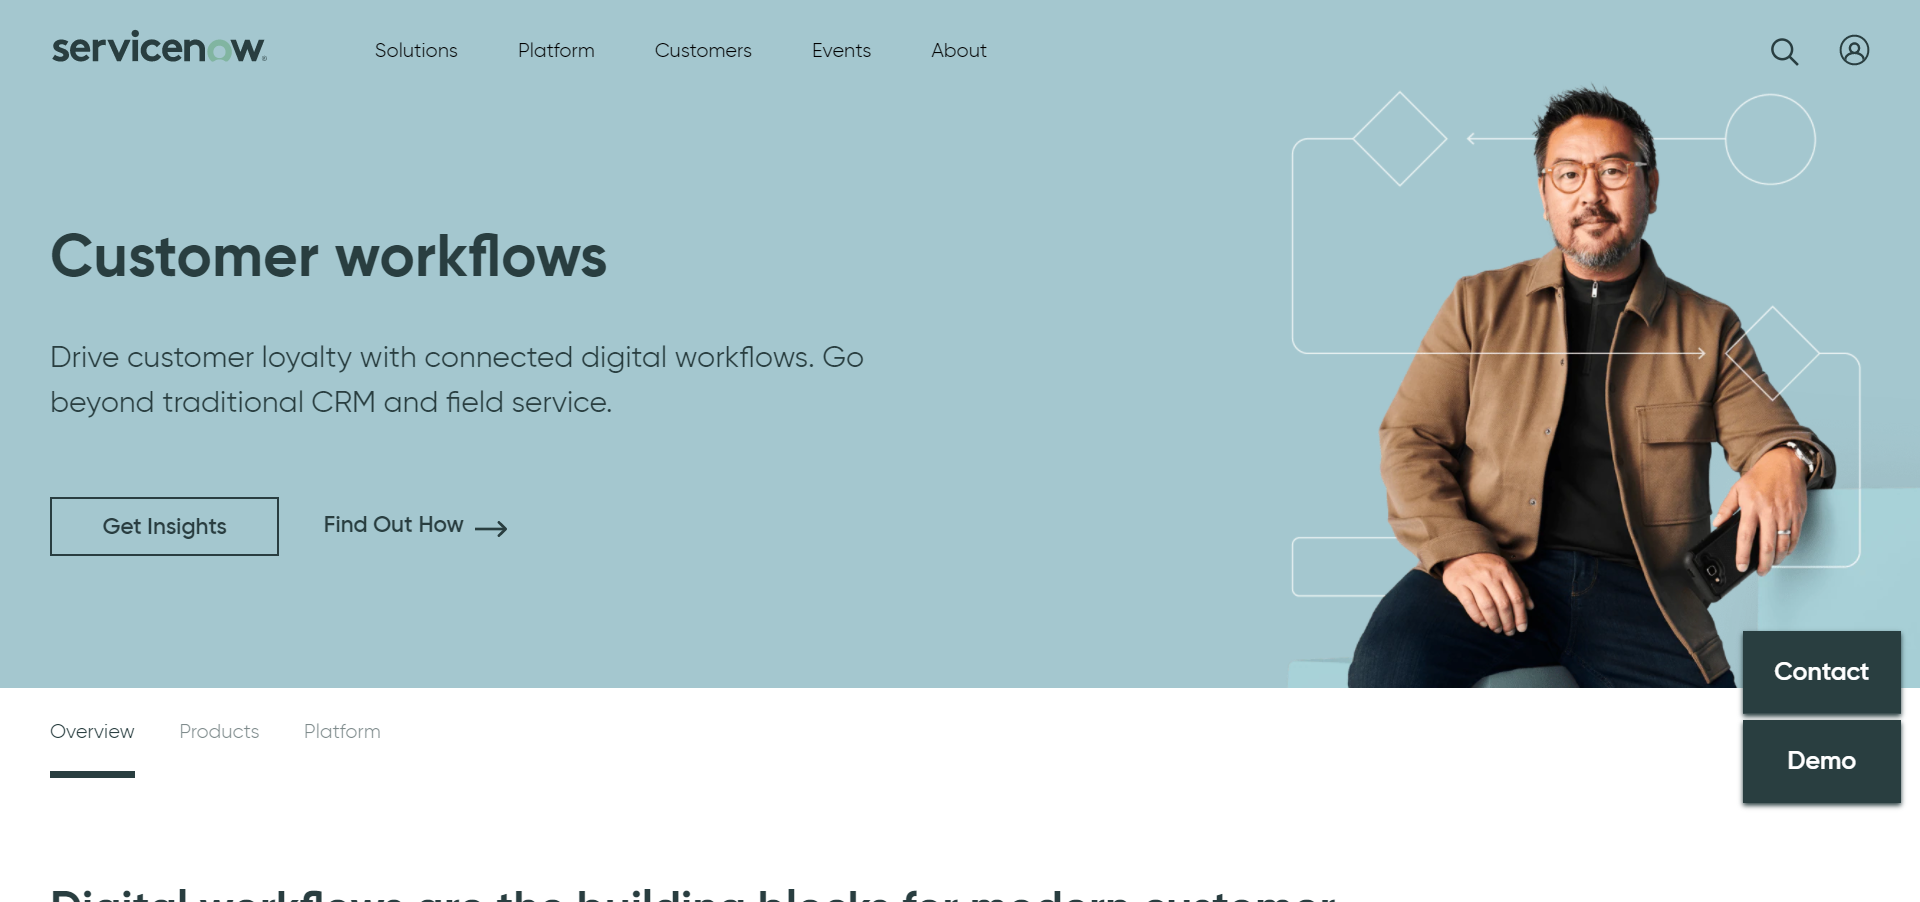 ServiceNow product / service